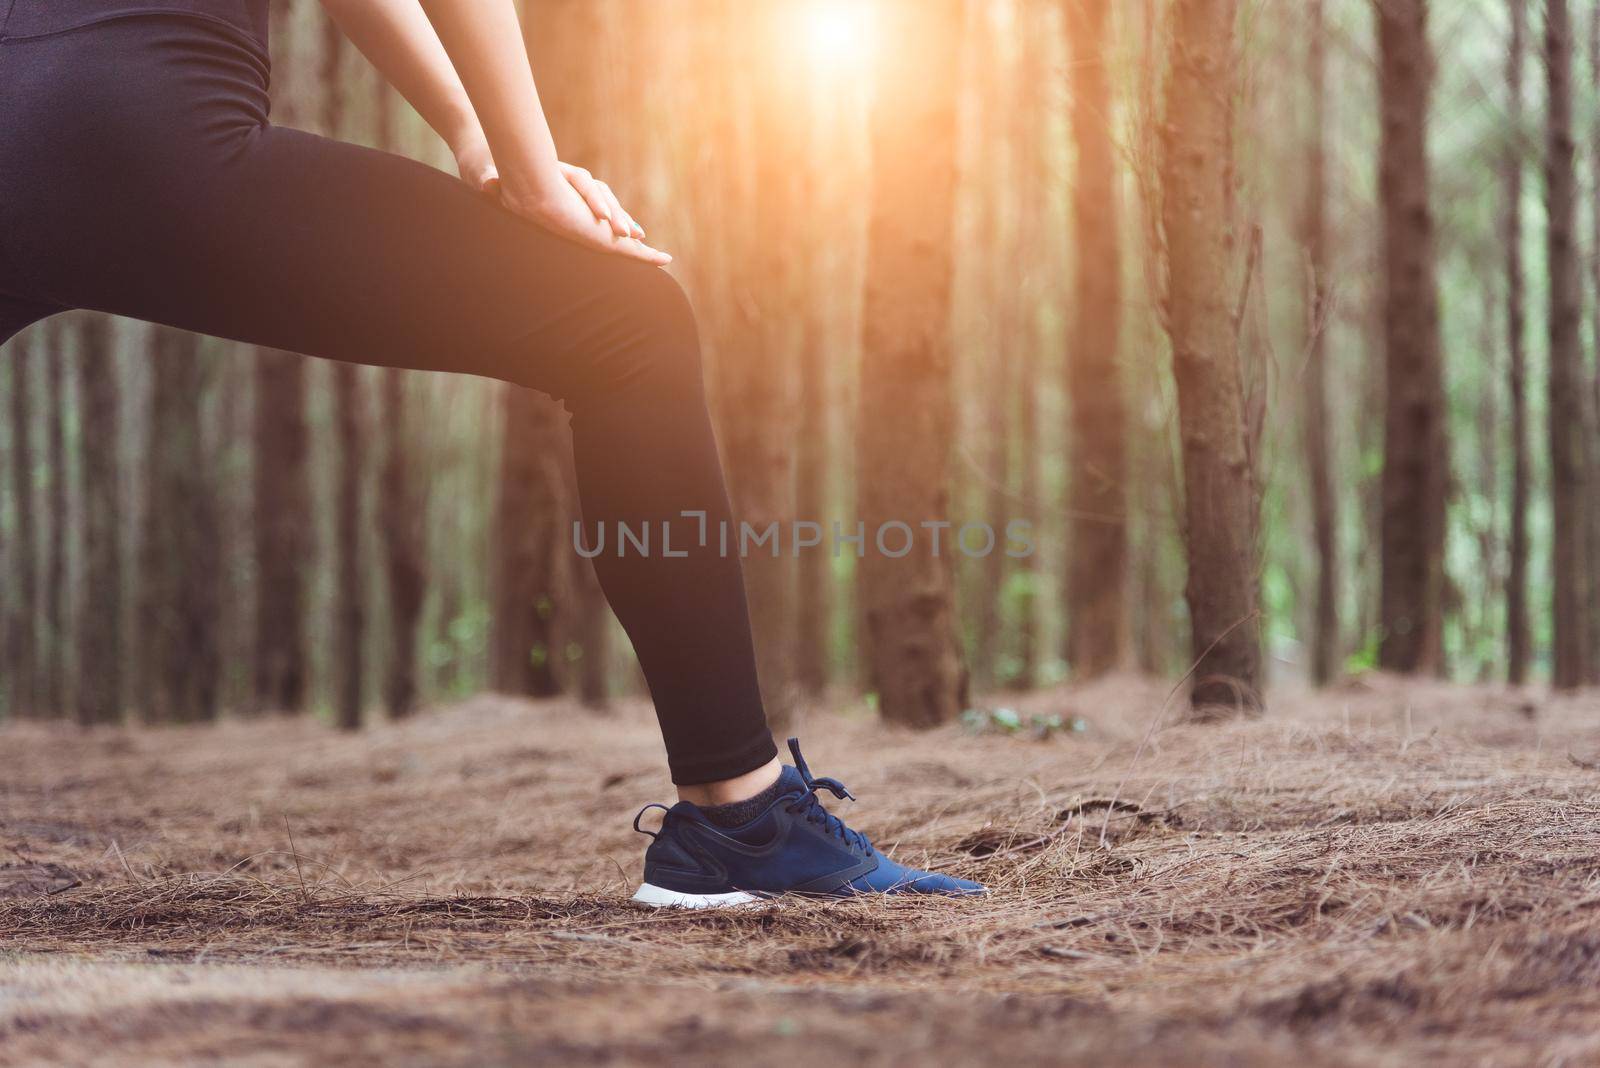 Close up of lower body of woman doing yoga and stretching legs before running in forest at outdoors. Sports and Nature concept. Lifestyle and Activity concept. Pine woods theme.